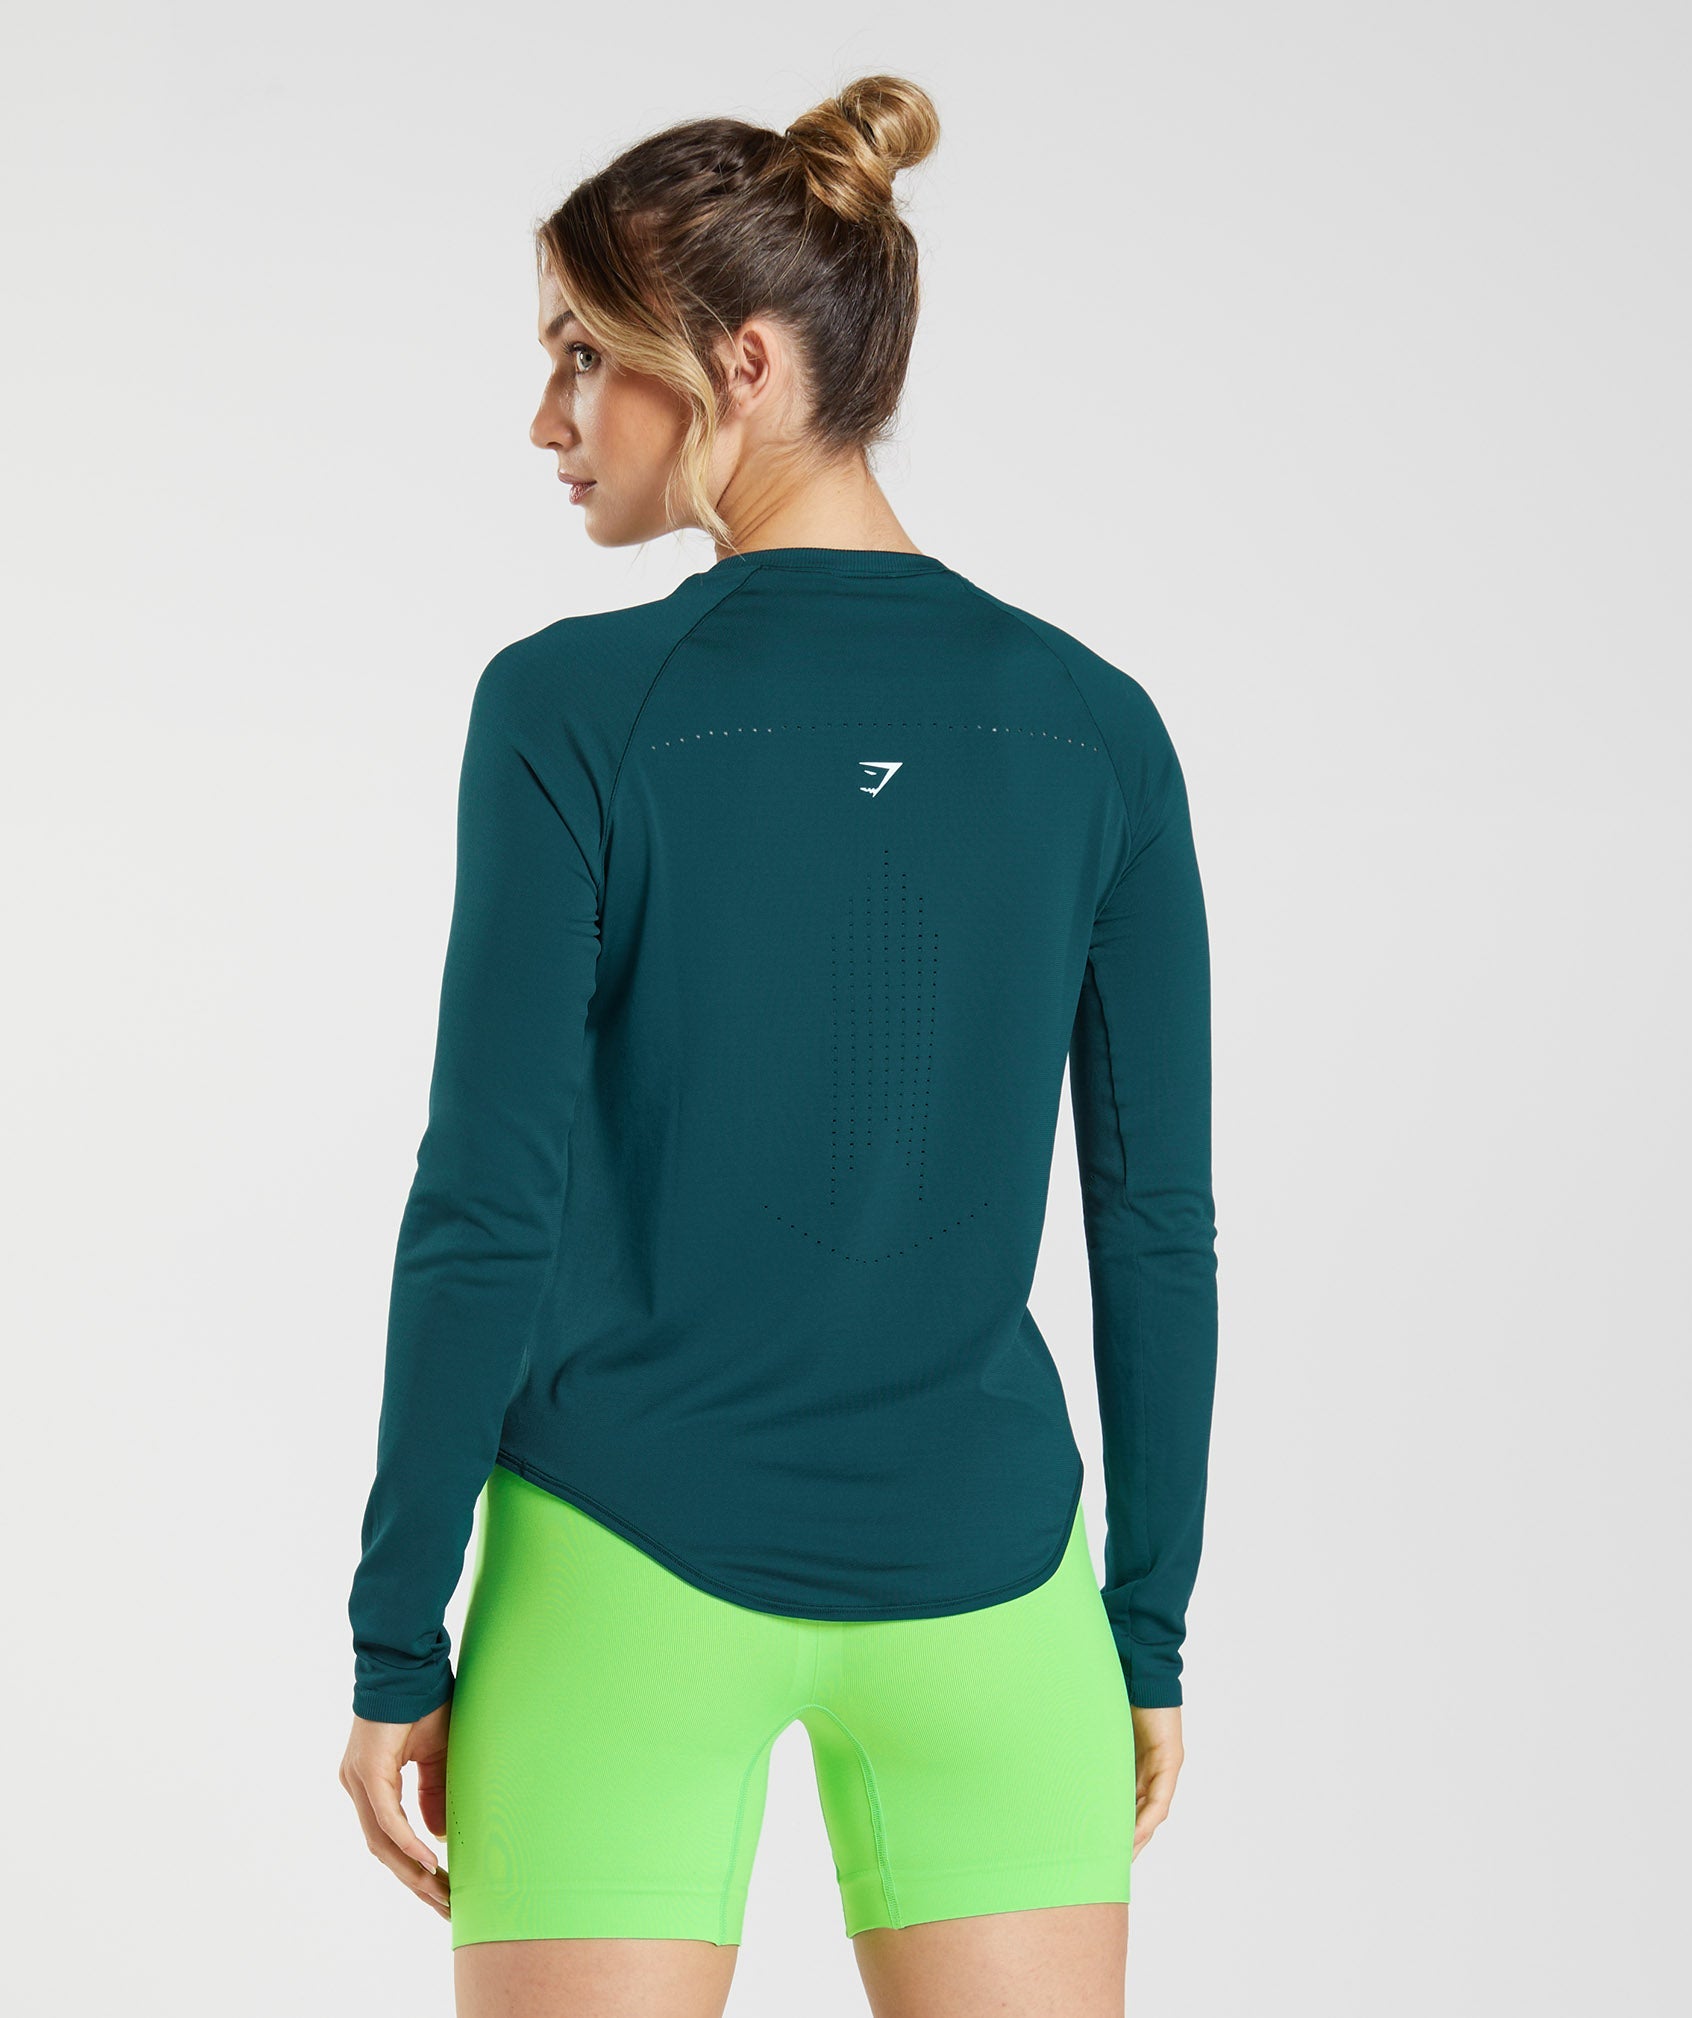 Sweat Seamless Long Sleeve Top in Winter Teal - view 2